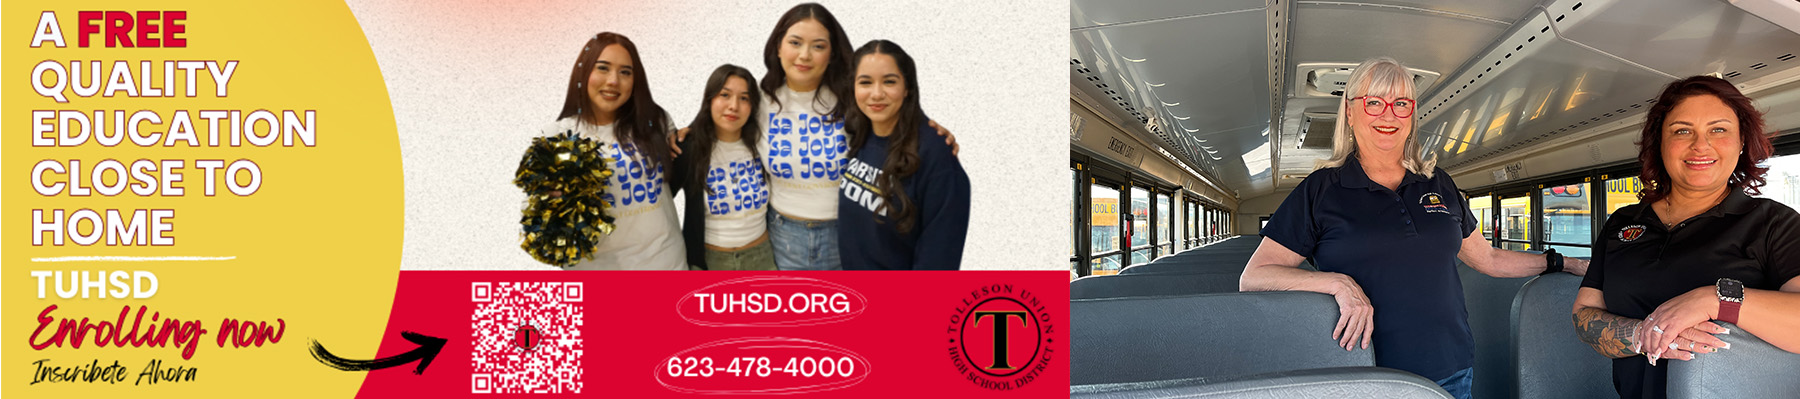 A free quality education close to home - TUHSD Enrolling now | Inscribete Ahora - tuhsd.org - 623-478-4000| Two happy ladies on a school bus